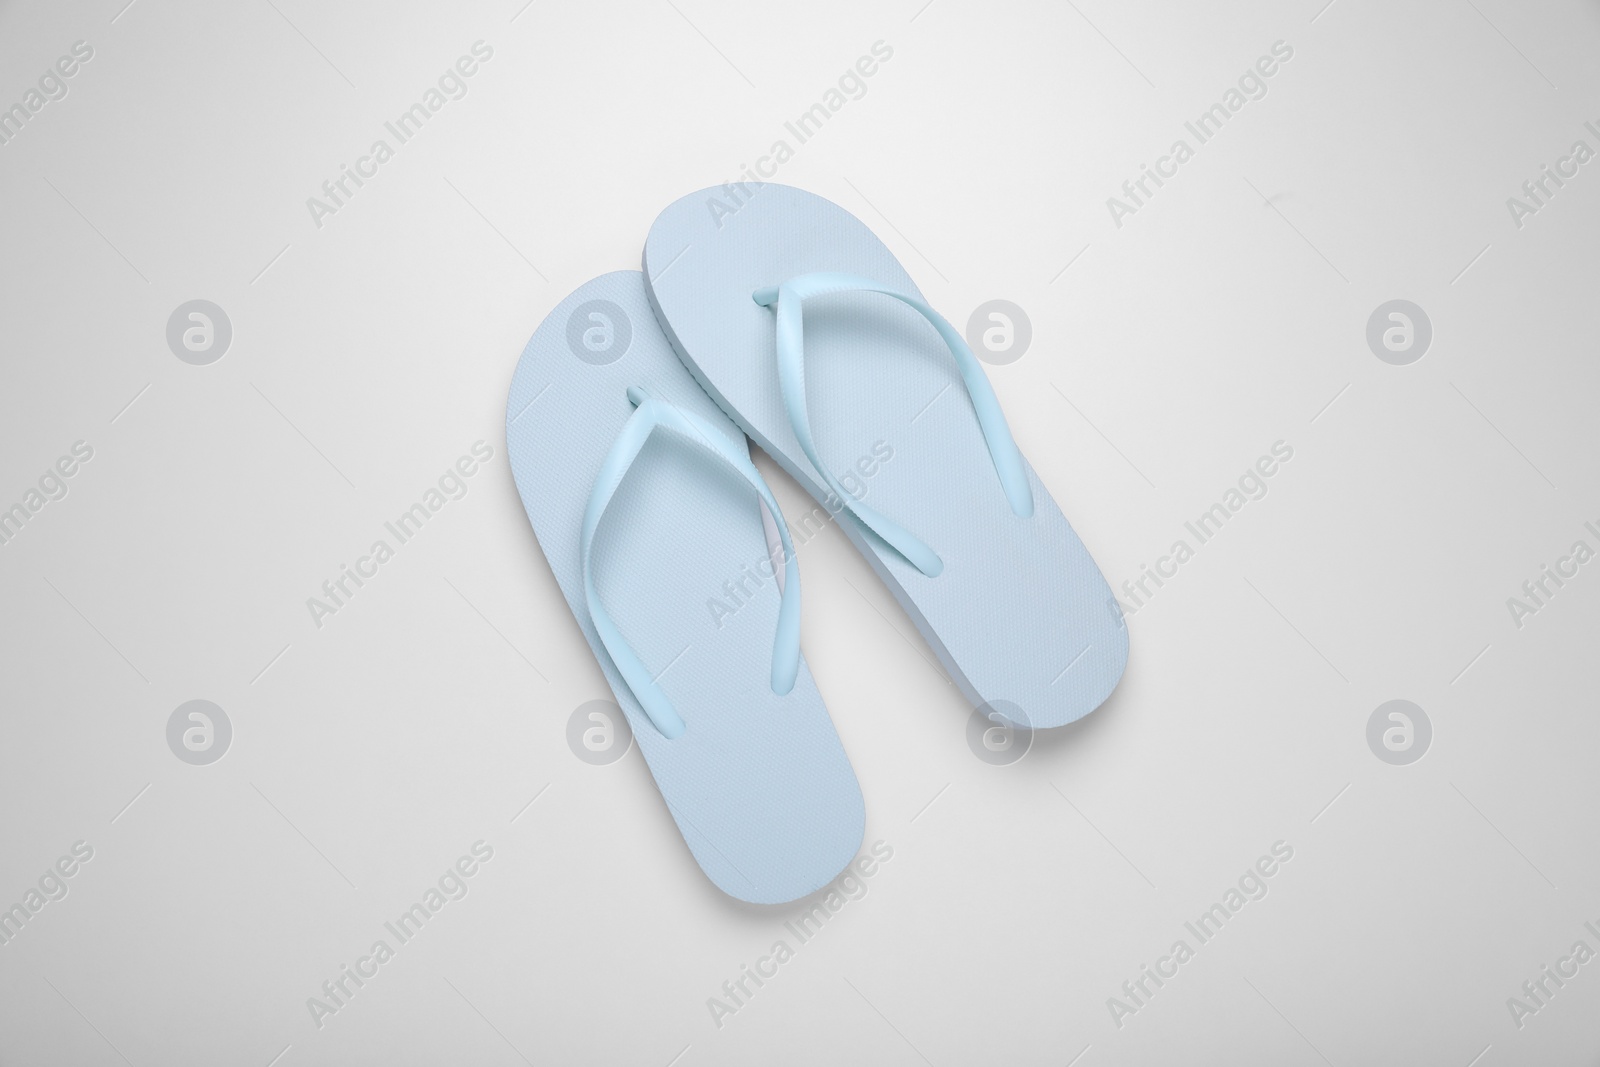 Photo of Light blue flip flops on white background, top view